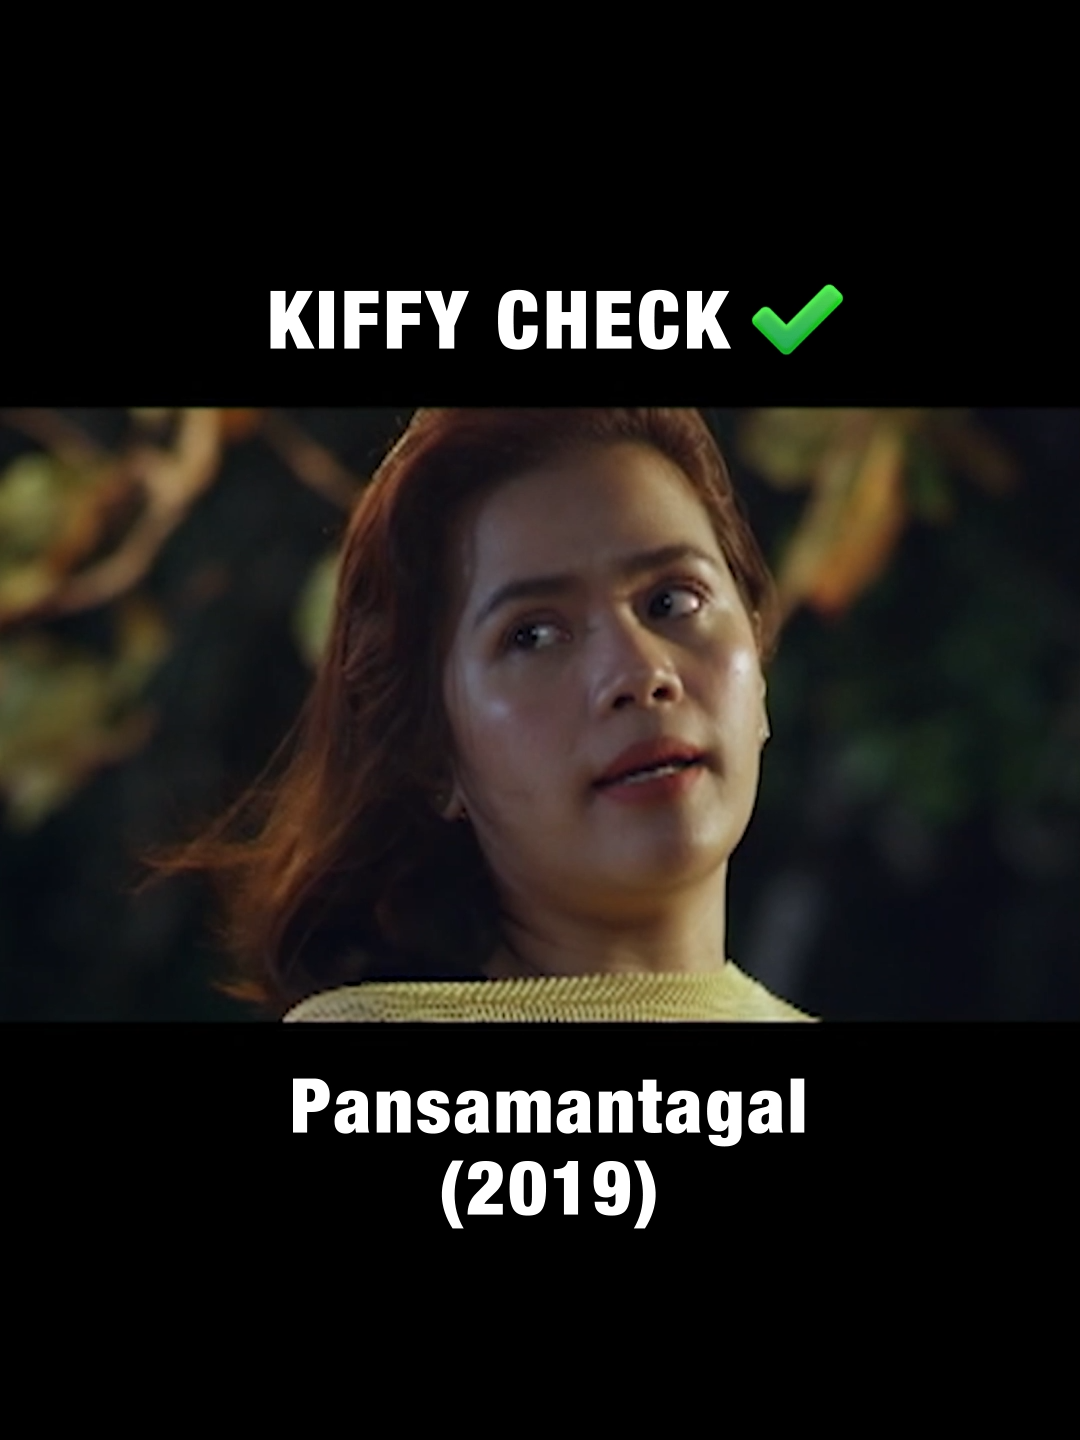 Ikaw na matagal na single 😅 🎥 Pansamantagal 🗓 July 17, 11PM sa #CinemaOne! Available on Sky Cable Ch 56, Cignal Ch 45, GSat Ch 14, & other provincial cable operators. #CinemaOne #FreeMovies #FreePinoyMovies #PinoyMovies #PHFilms #OldFilms #Trending #ABSCBN #Kapamilya #FilmClips #Viral